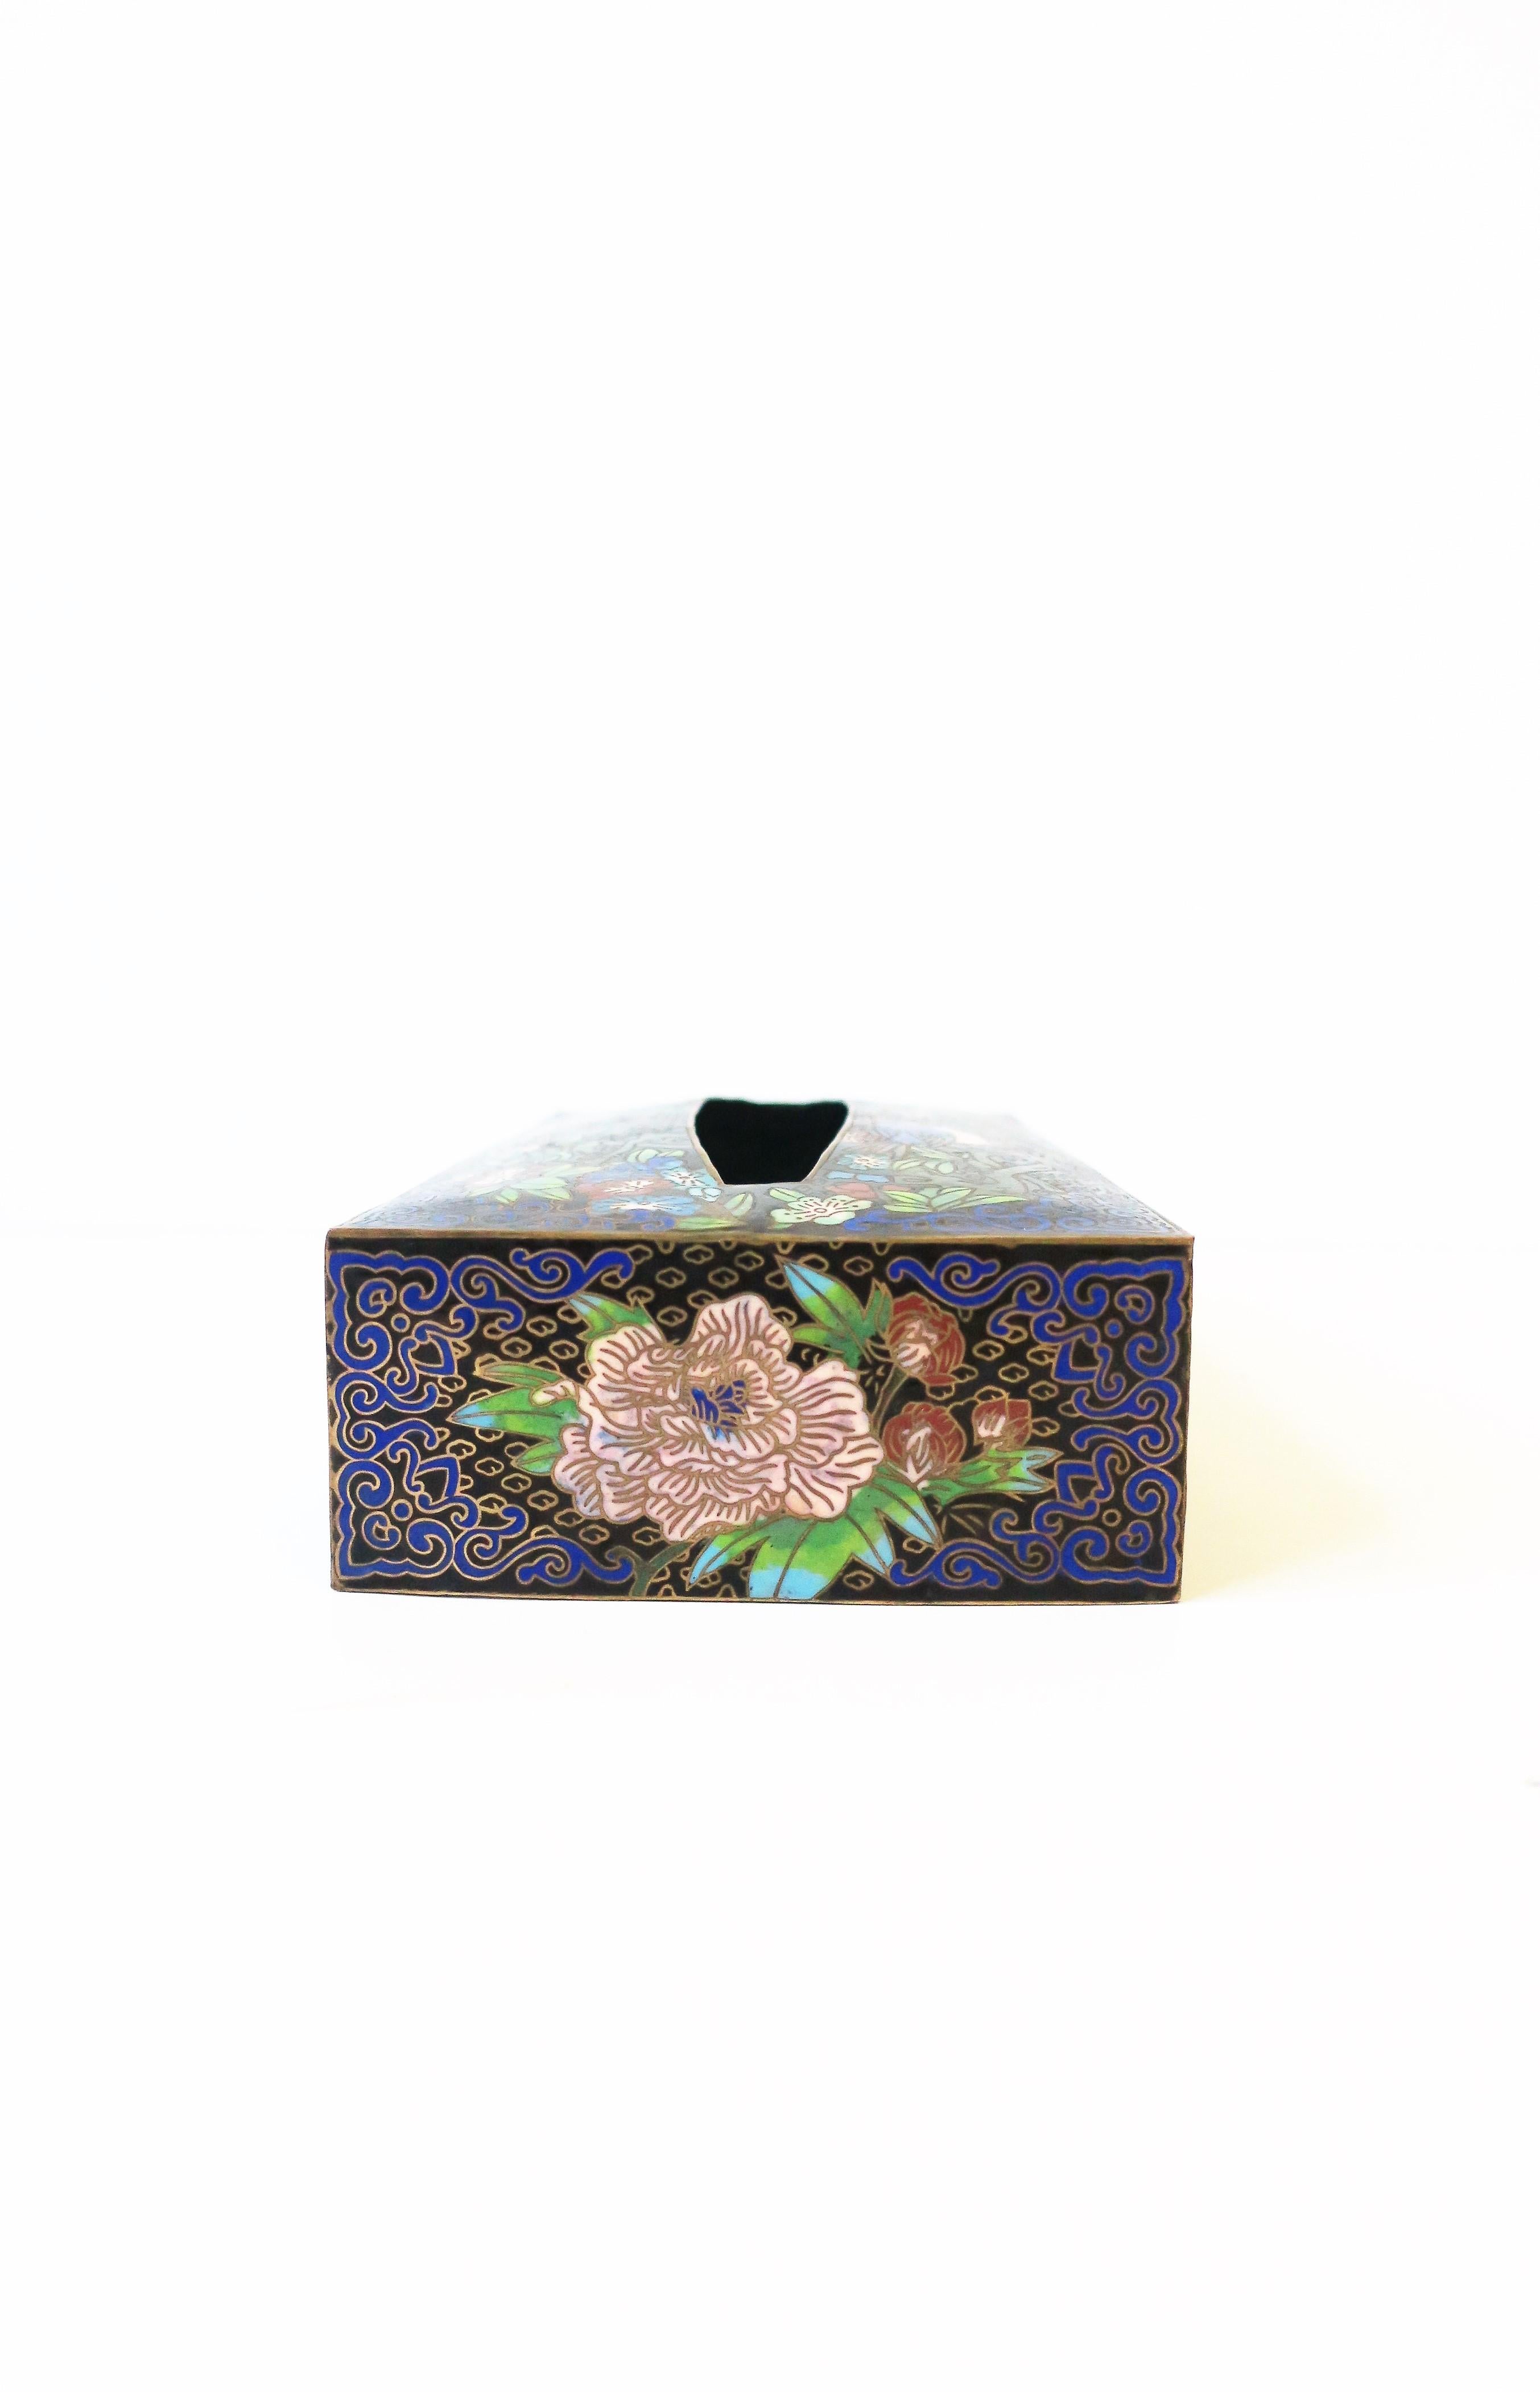 Late 20th Century Brass and Cloisonné Enamel Tissue Box Holder Cover with Birds and Flowers